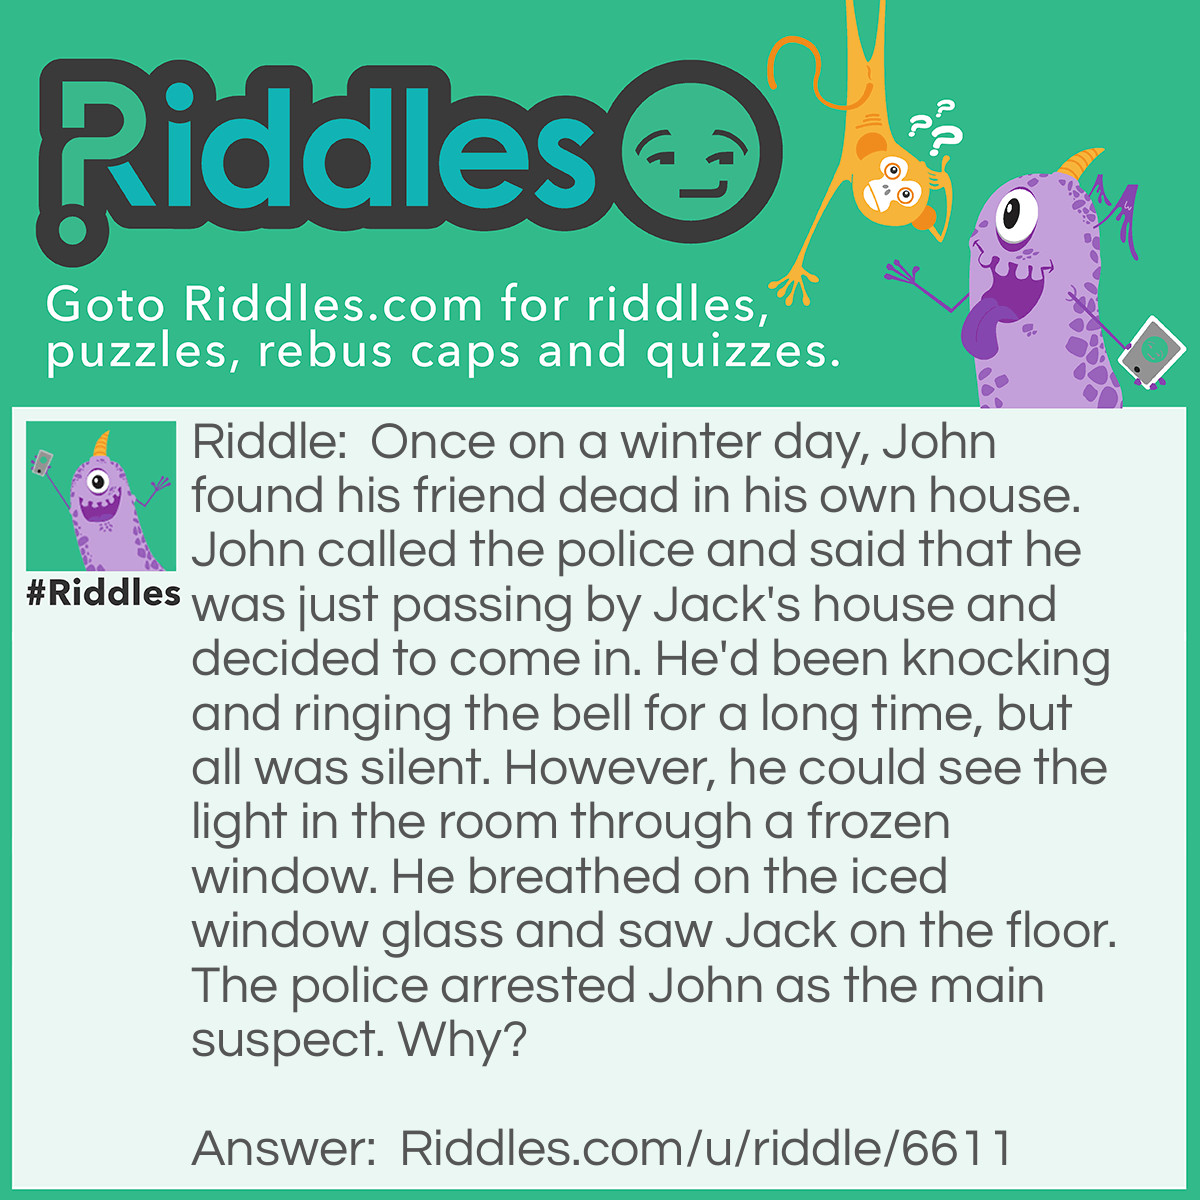 Riddle: Once on a winter day, John found his friend dead in his own house. John called the police and said that he was just passing by Jack's house and decided to come in. He'd been knocking and ringing the bell for a long time, but all was silent. However, he could see the light in the room through a frozen window. He breathed on the iced window glass and saw Jack on the floor. The police arrested John as the main suspect. Why? Answer: John wouldn’t be able to unfreeze the window glass because it’s usually icy on the inside.